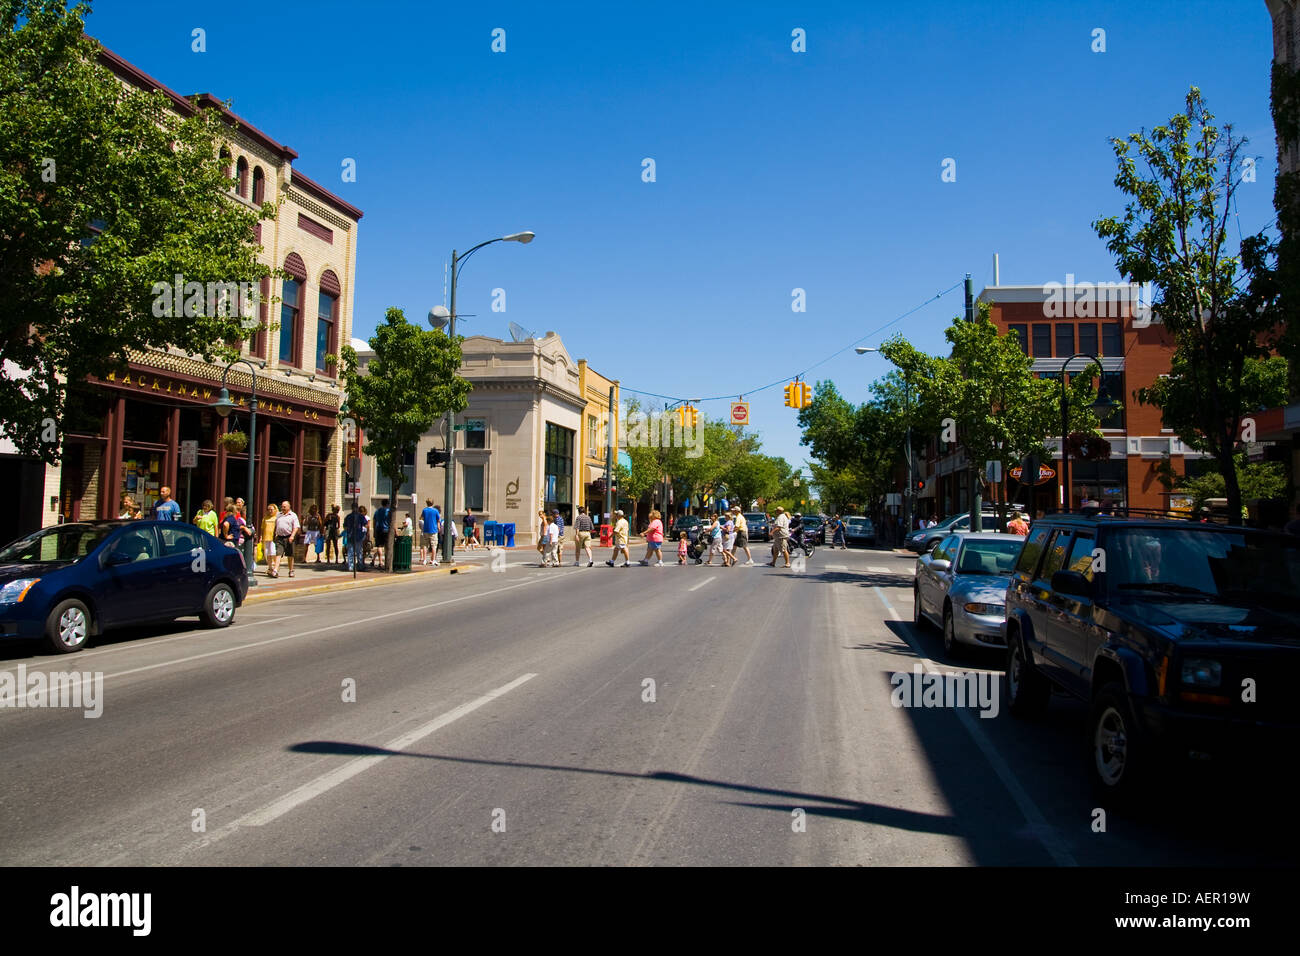 People crossing main street in downtown Traverse City Michigan Stock Photo